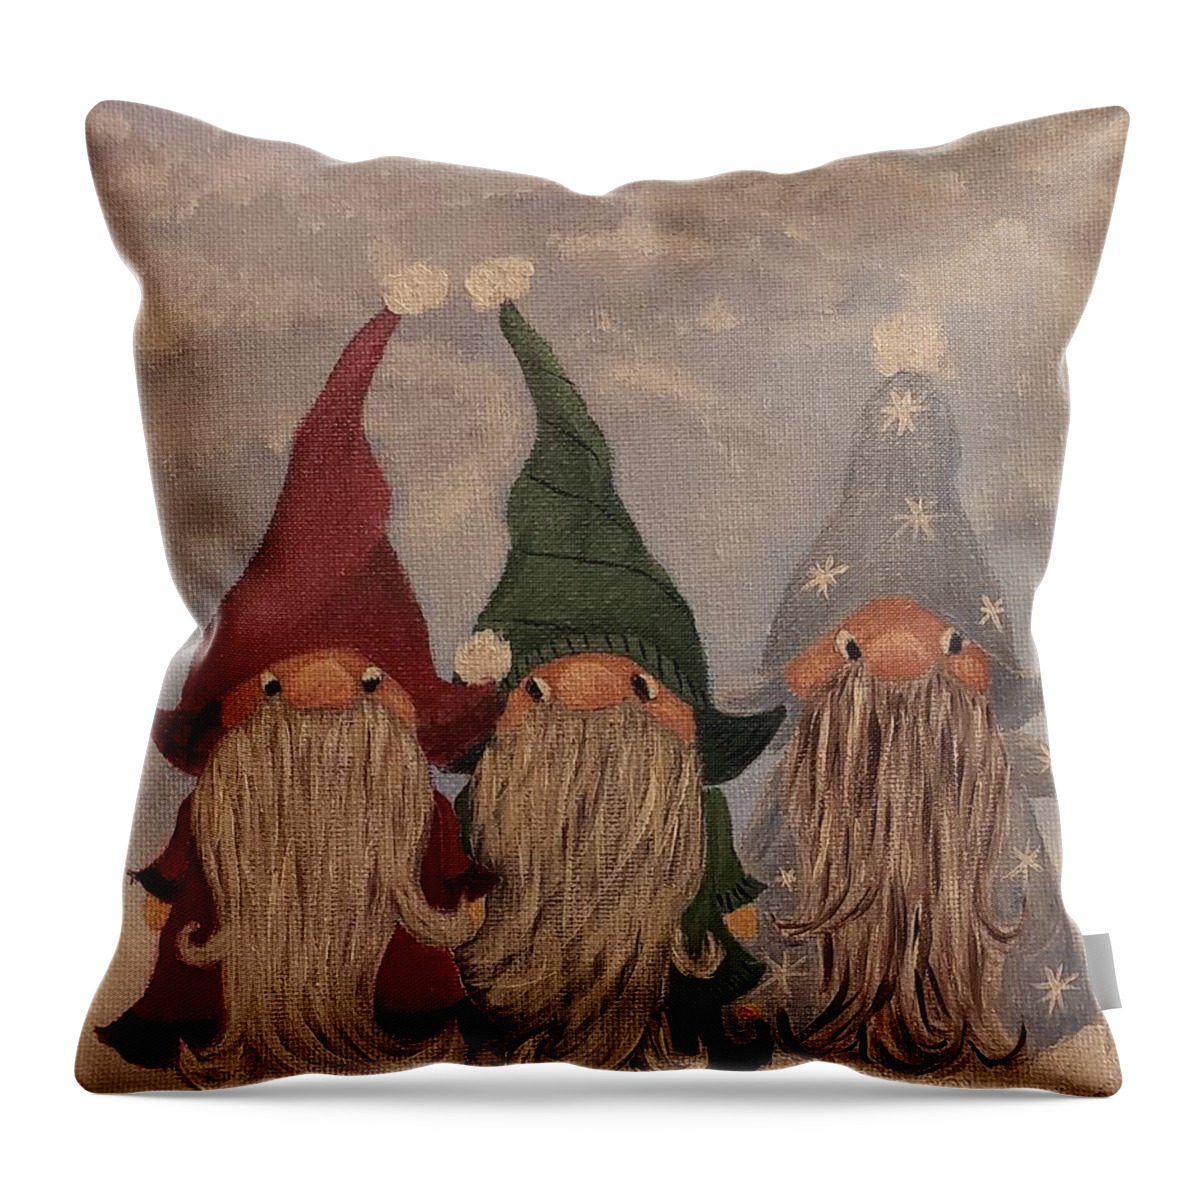 Christmas Gnomes Throw Pillow featuring the painting Xmas Gnomes by Michelle Stevens